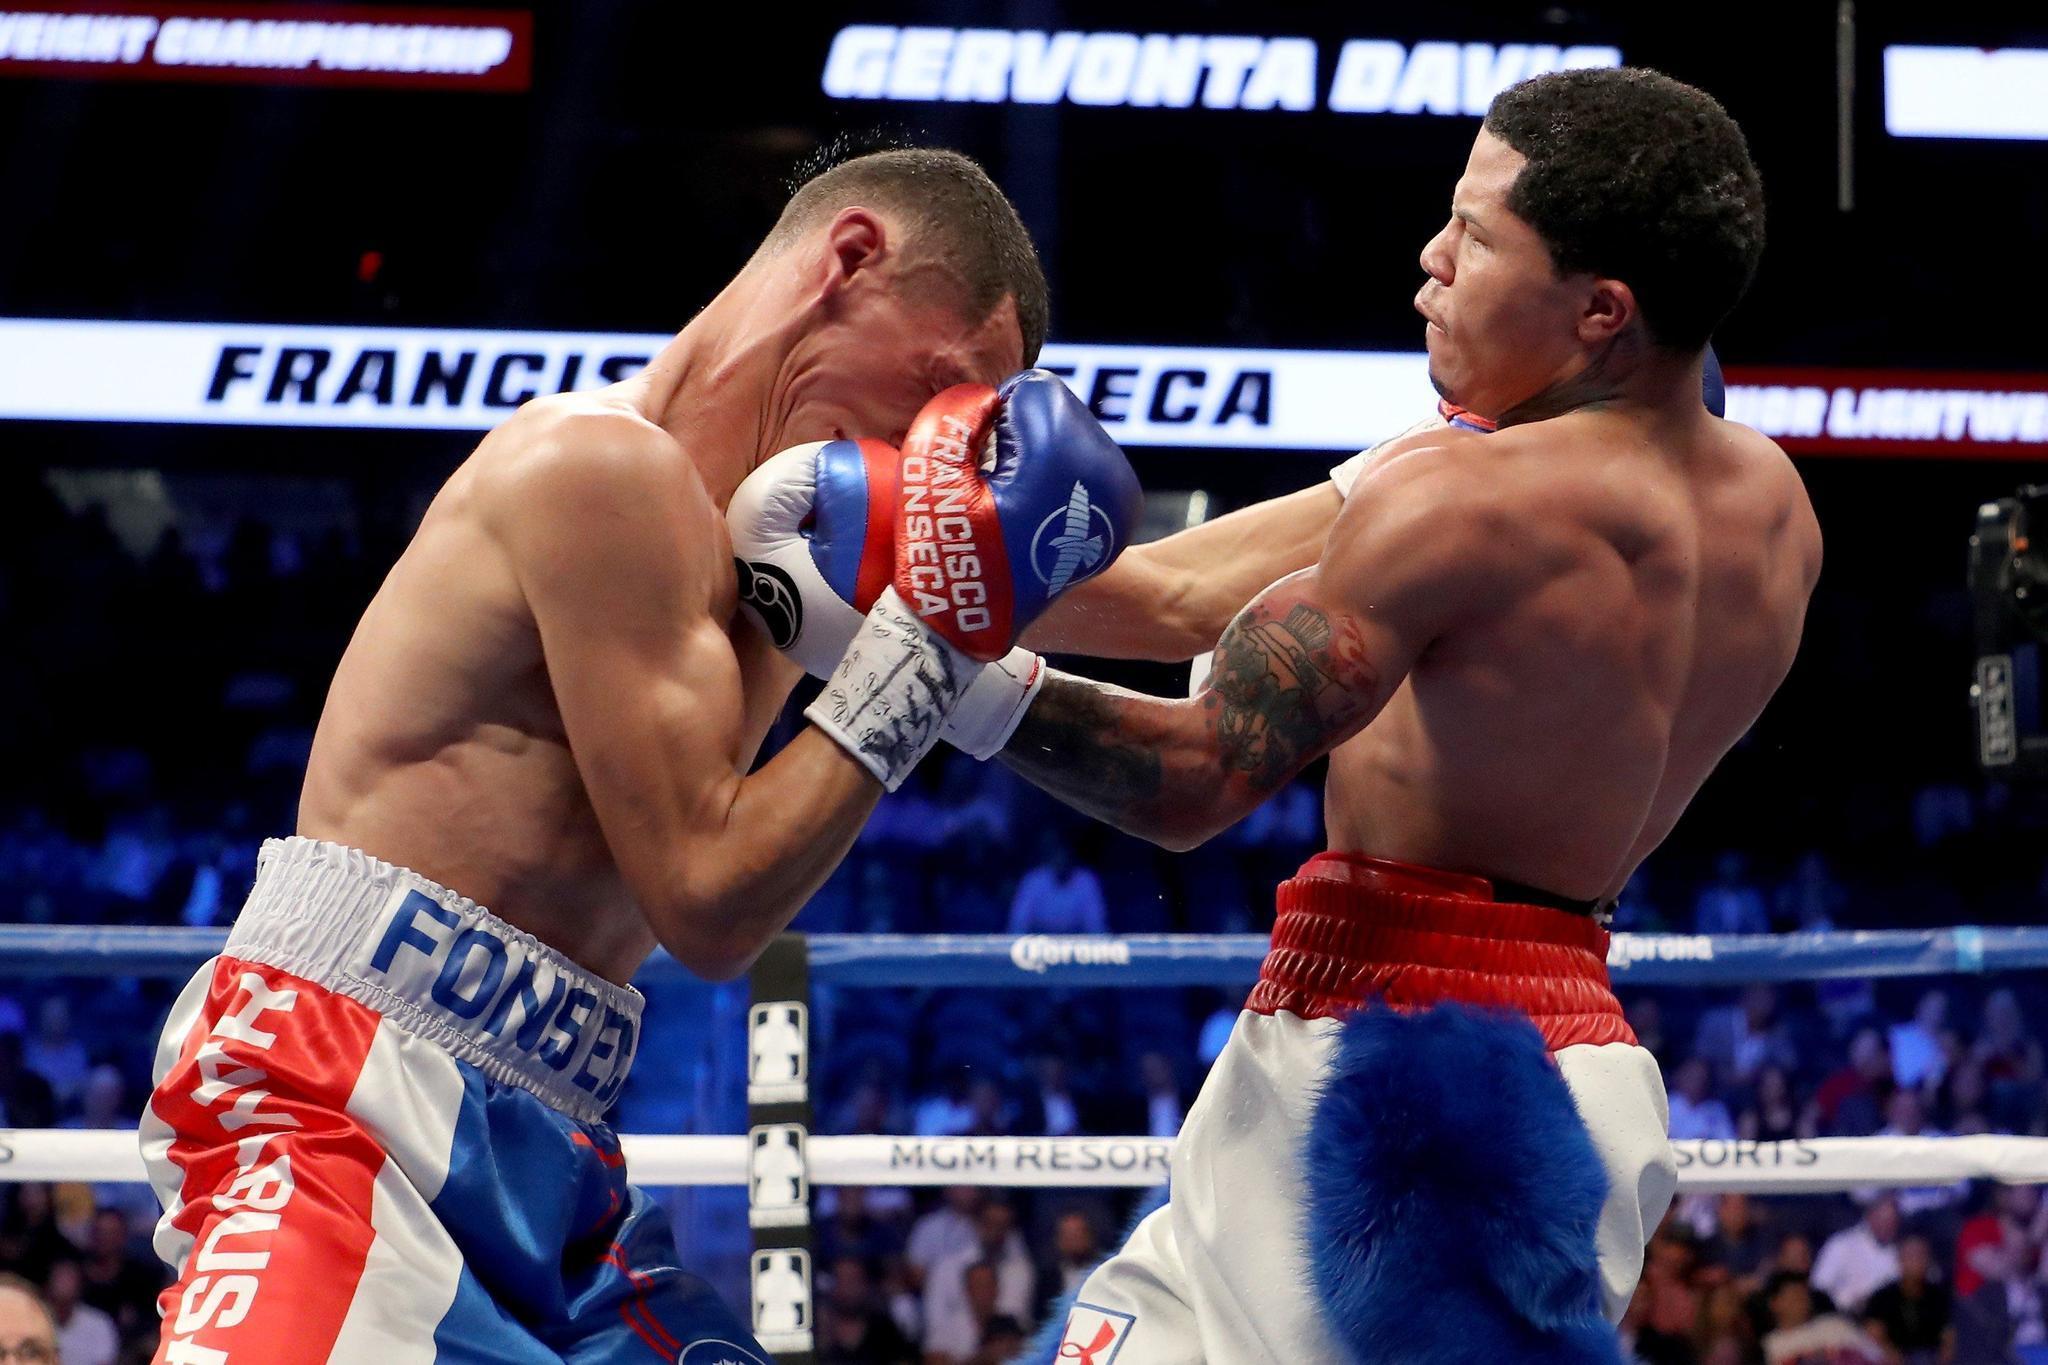 Baltimore's Gervonta Davis wins on controversial knockout in eighth round - Baltimore Sun